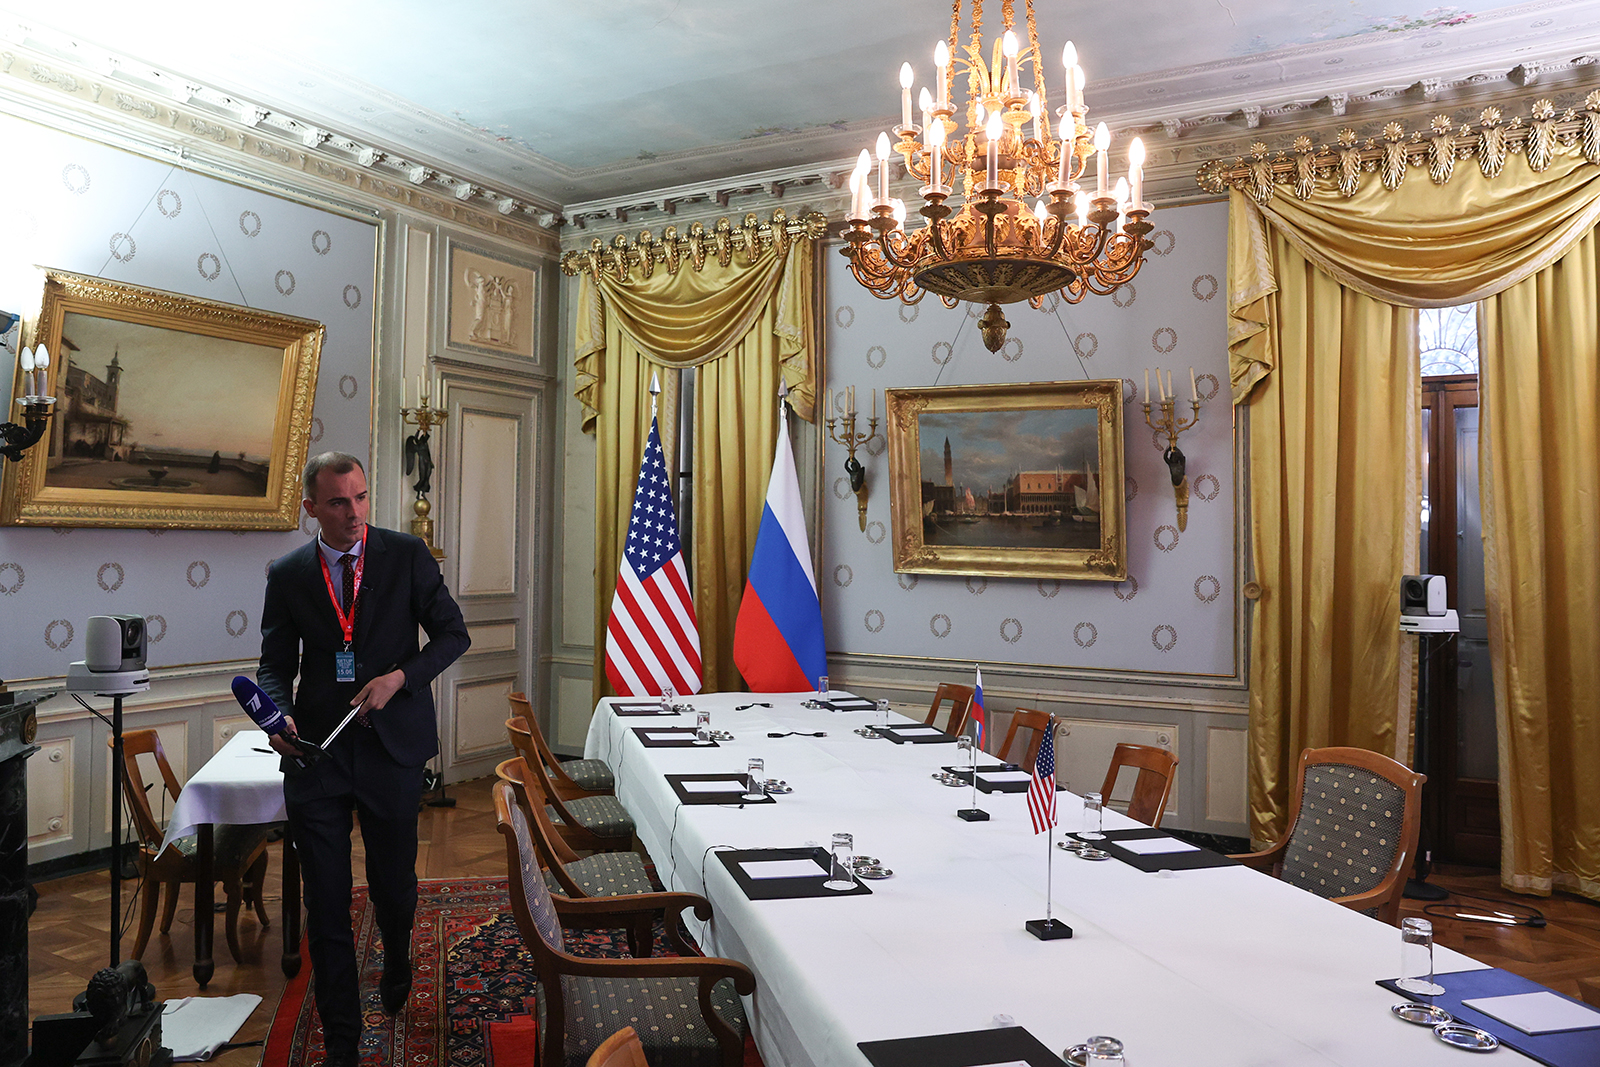 A room at the Villa La Grange arranged for Russian President Vladimir Putin and US President Joe Biden to hold their June 16 extended meeting as part of the US-Russia summit. 